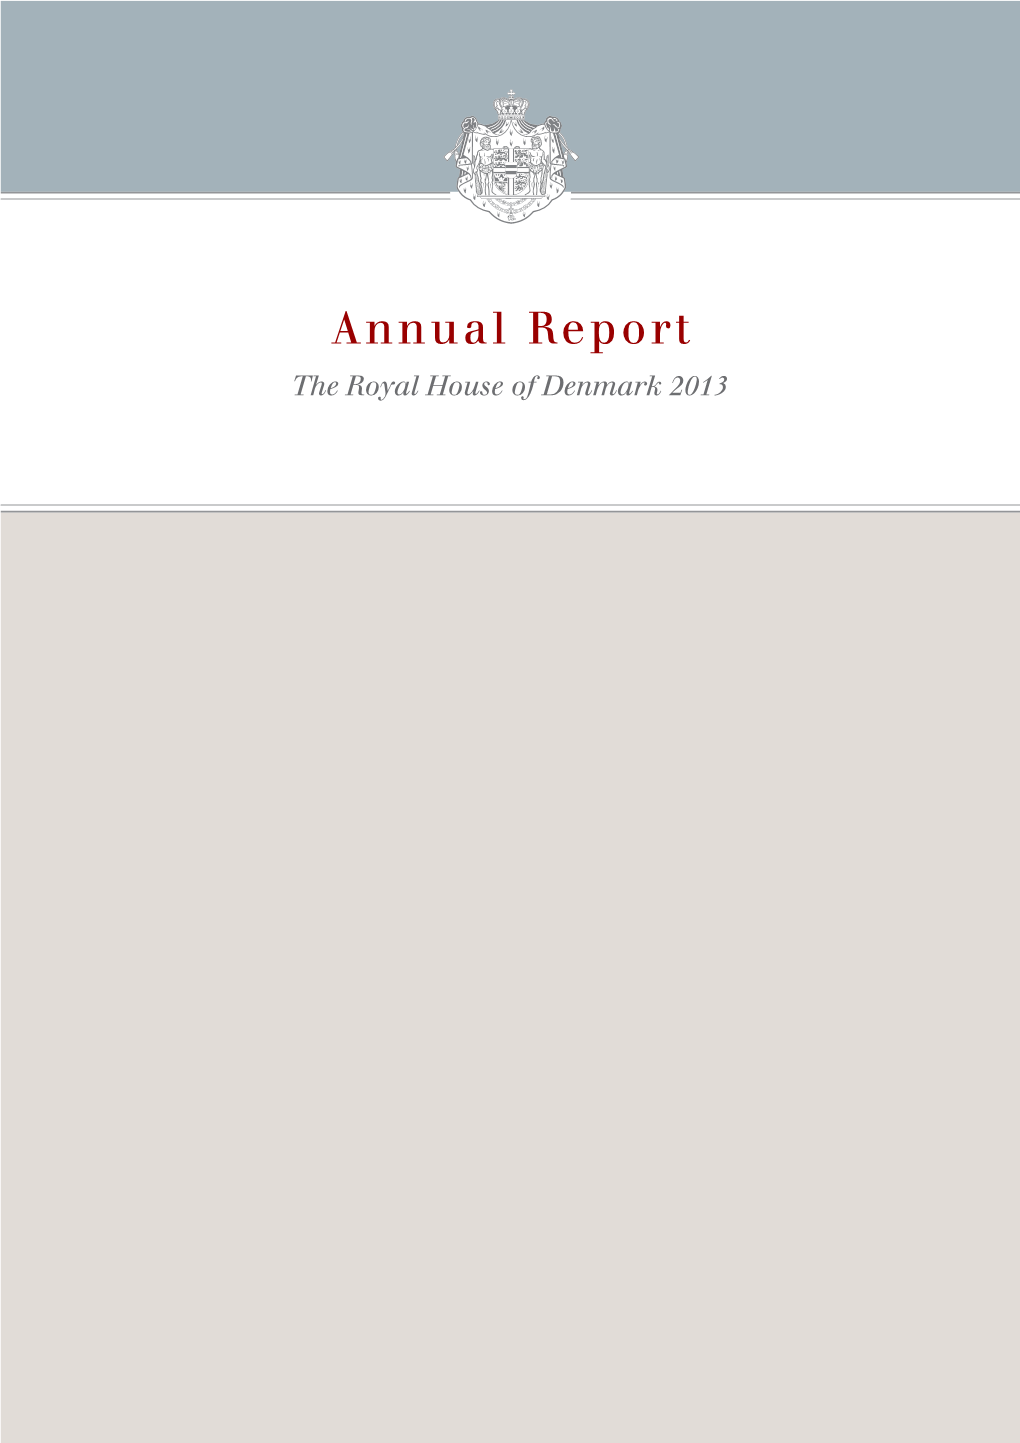 Annual Report the Royal House of Denmark 2013 Contents